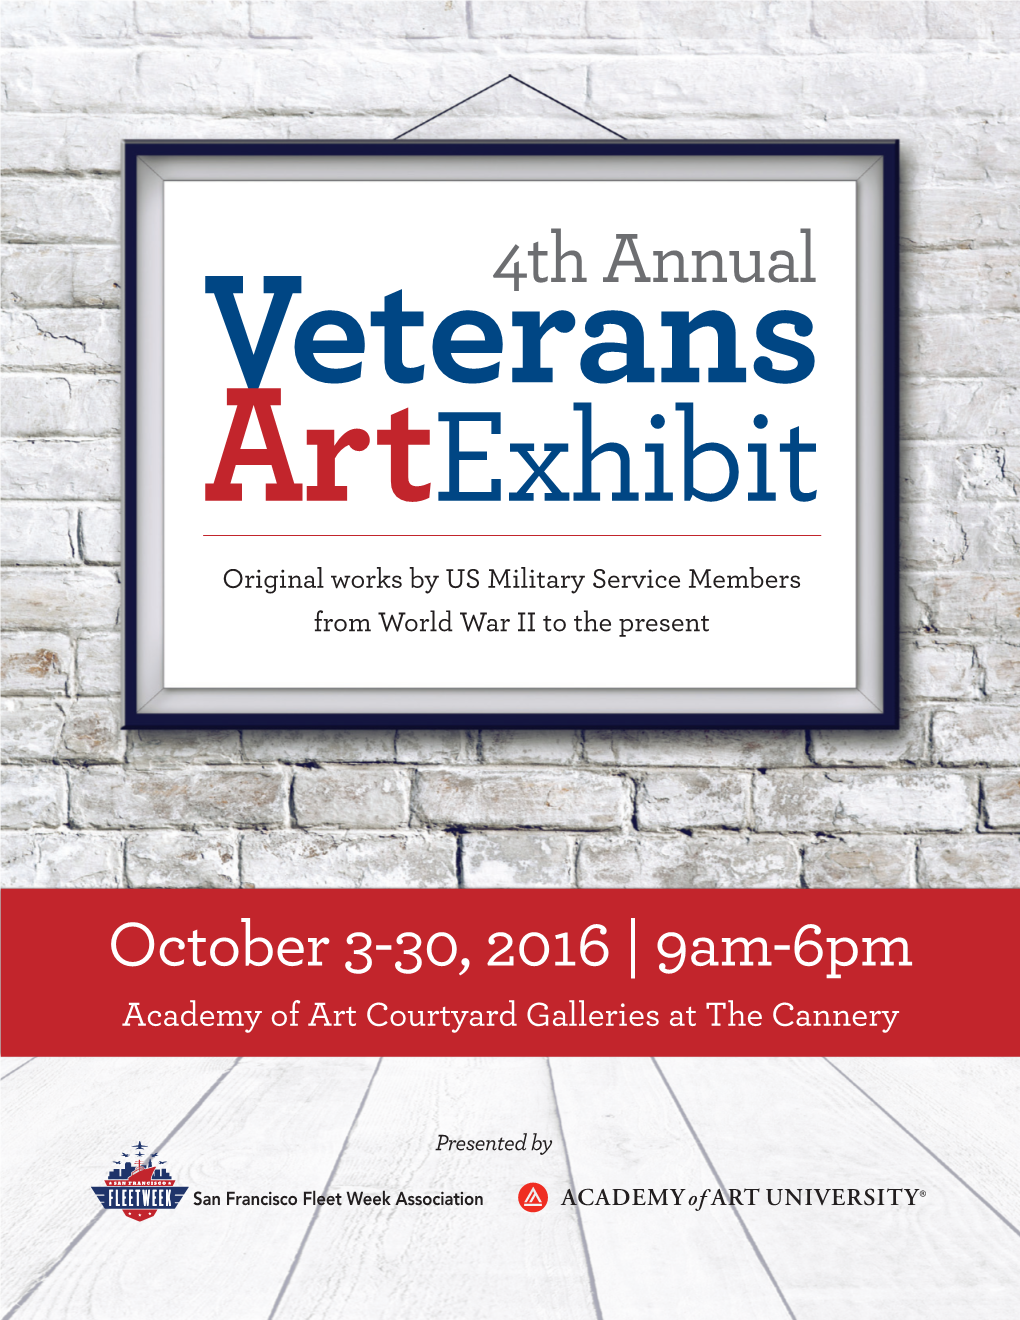 4Th Annual Veterans Artexhibit Original Works by US Military Service Members from World War II to the Present